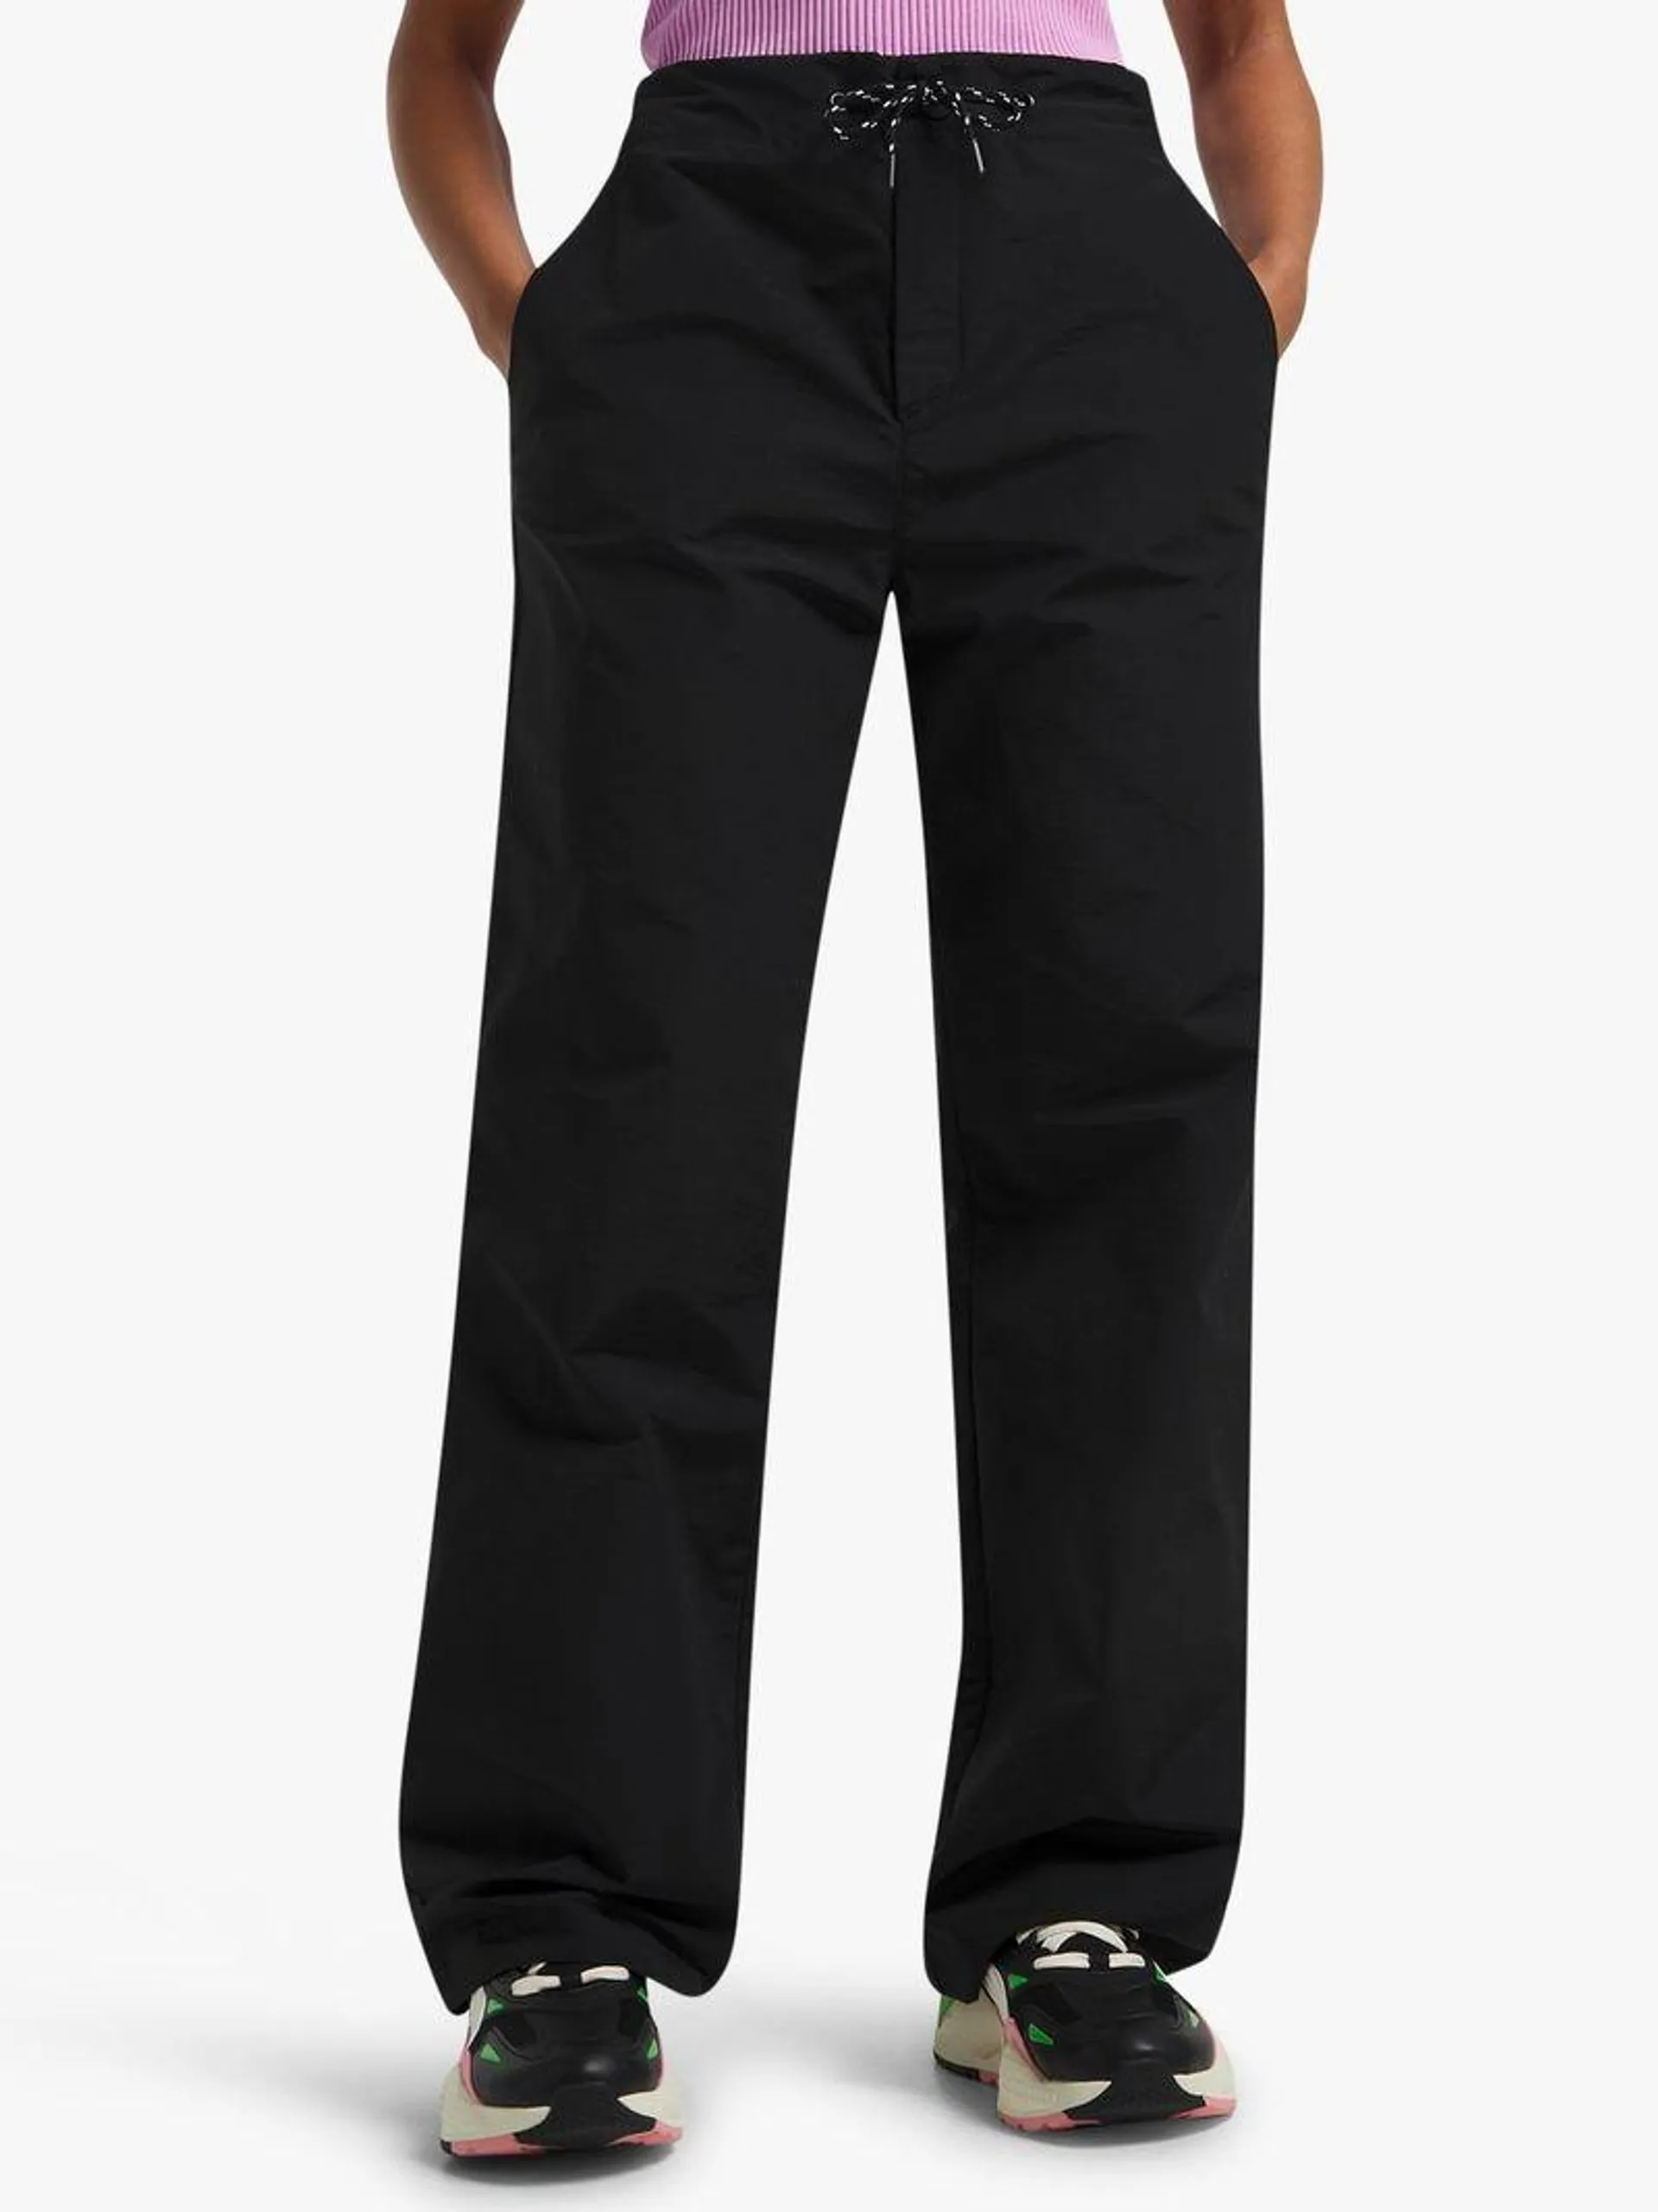 The North Face Women's Rope Tie Wide Leg Black Pants